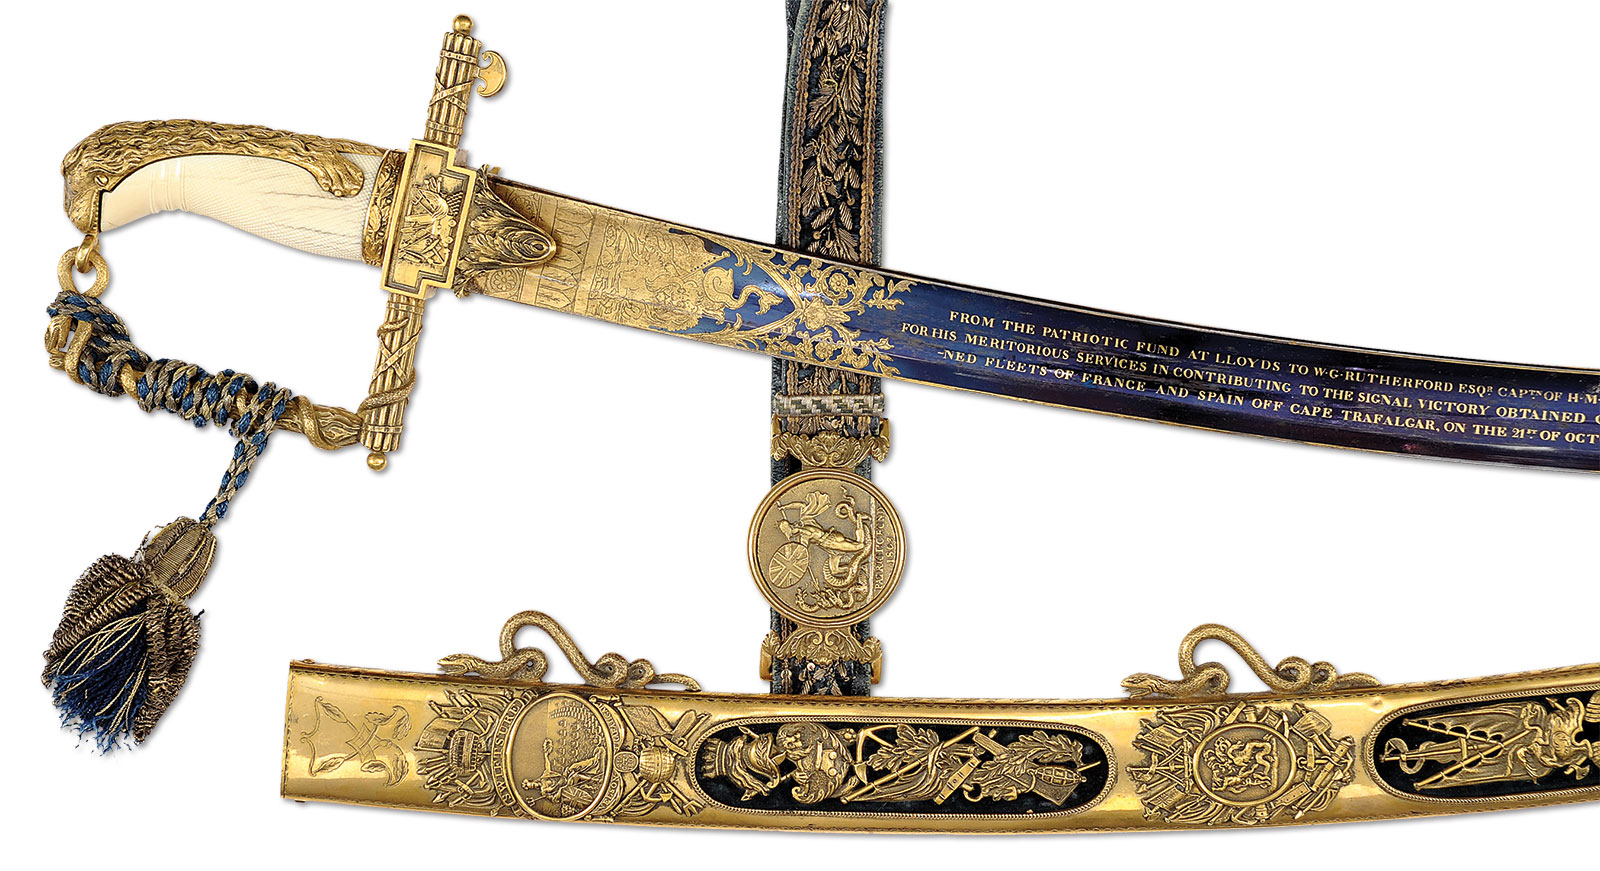 The extraordinary Rutherford presentation sword.  It comes to auction with a presale estimate of $150,000-250,000.